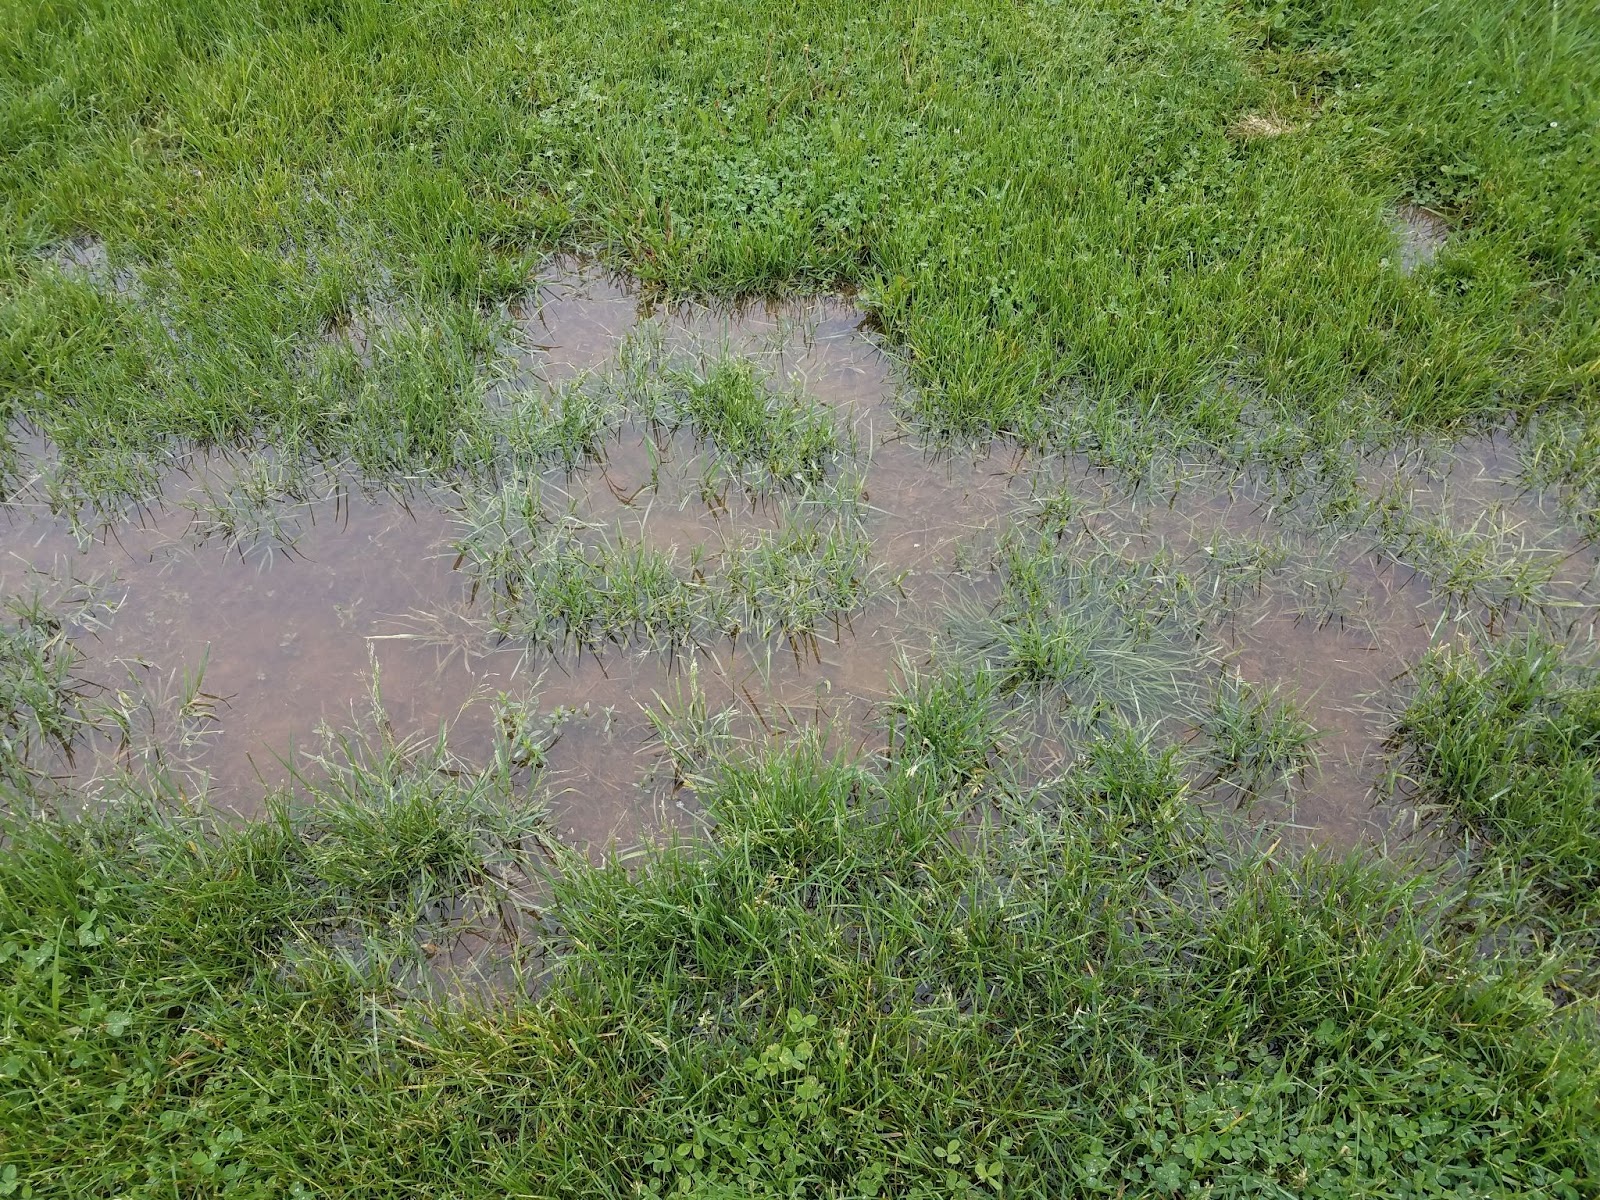 Puddle on grass